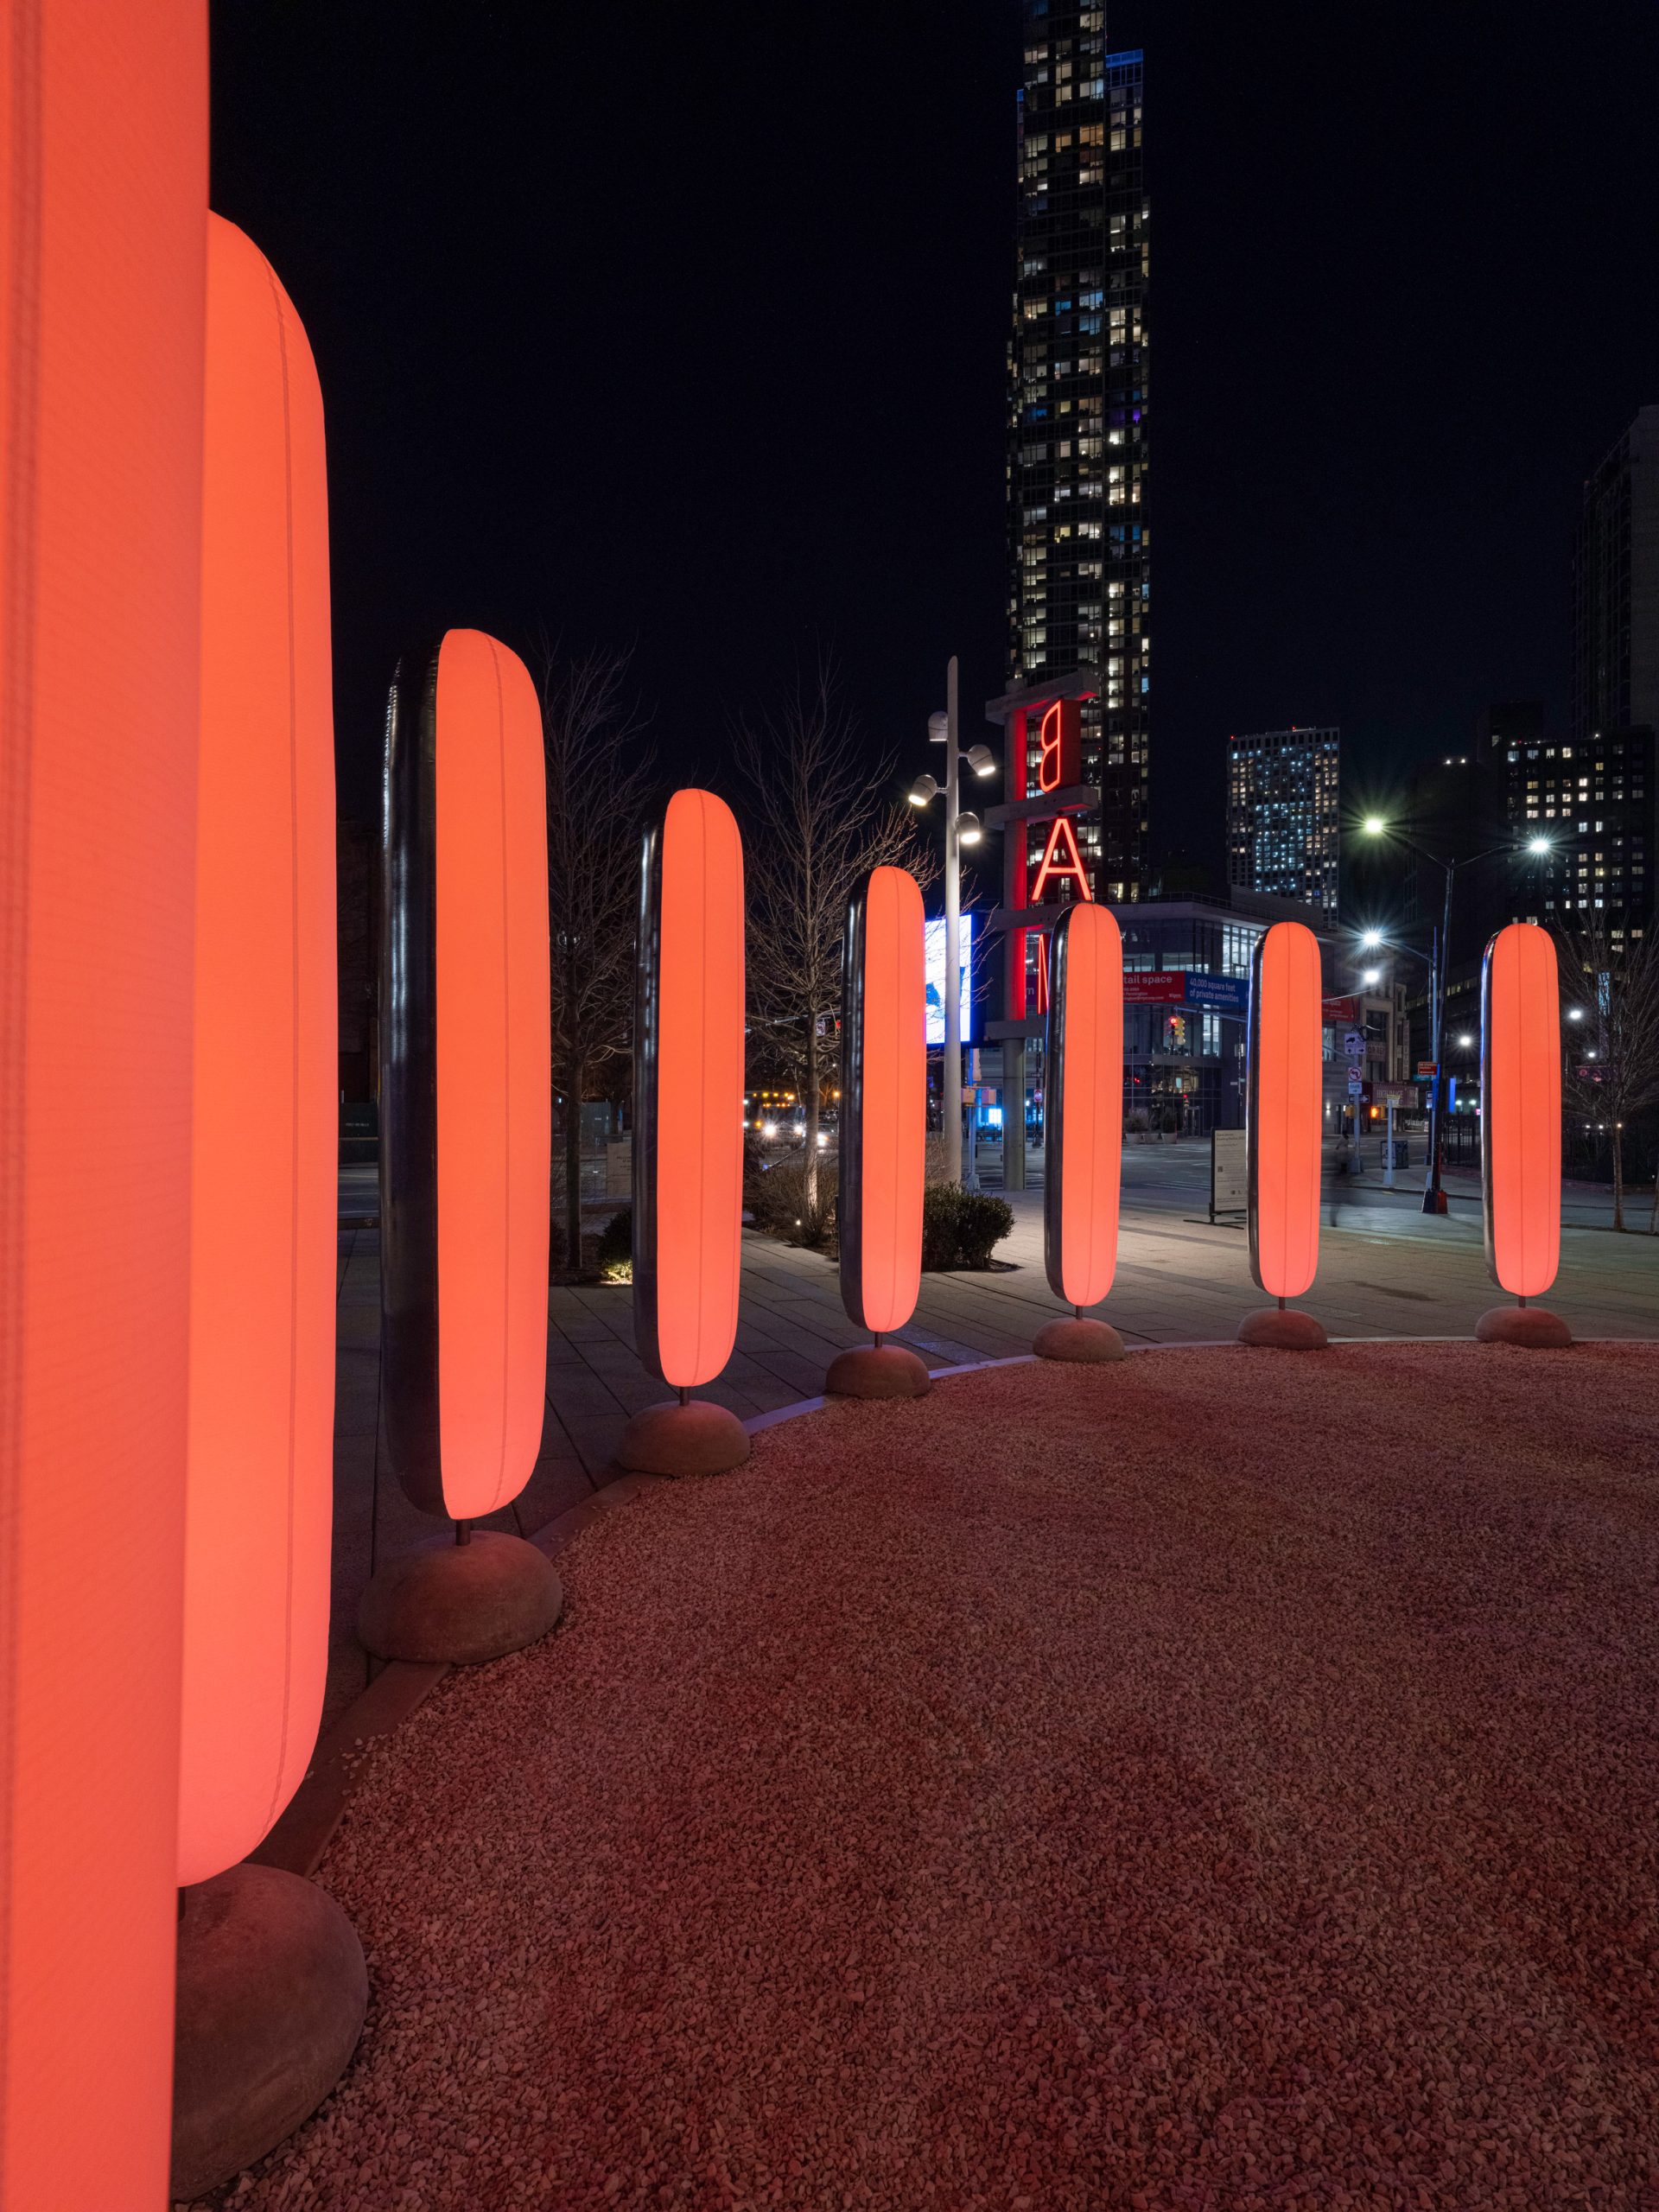 Inflatable pillars pulse with light to encourage deep breathing in